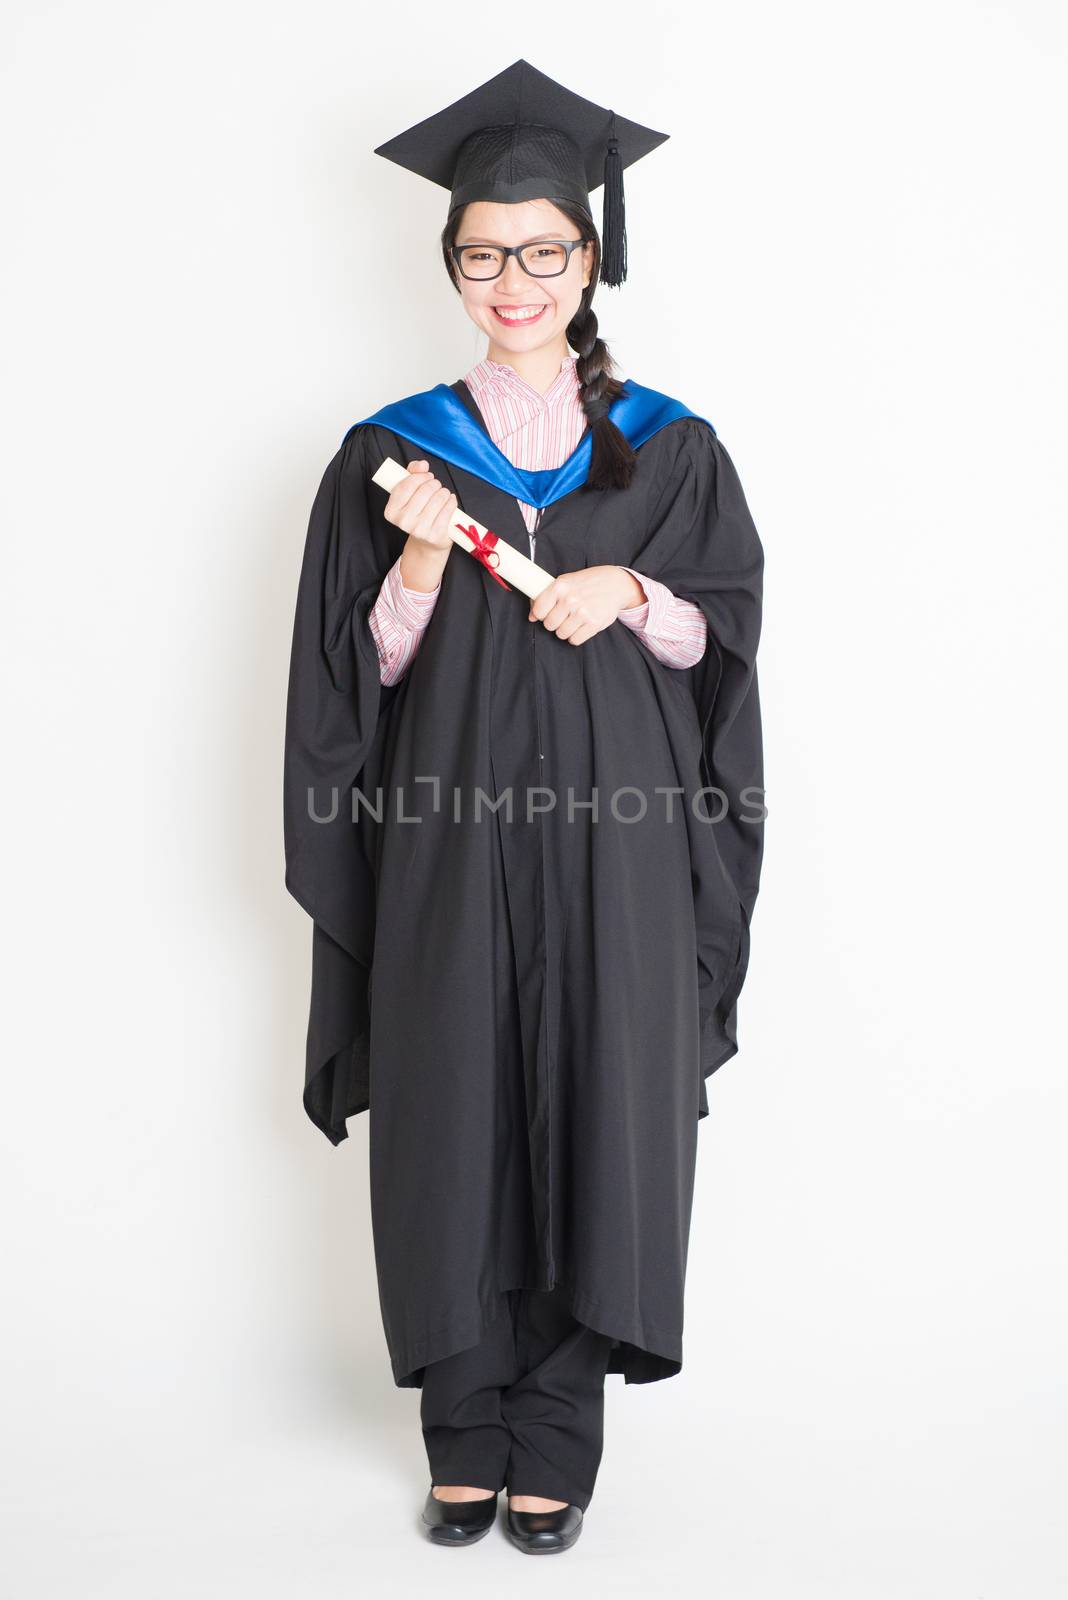 Happy university student in graduation gown and cap holding diploma certificate. Full body portrait of east  Asian female model standing on plain background.